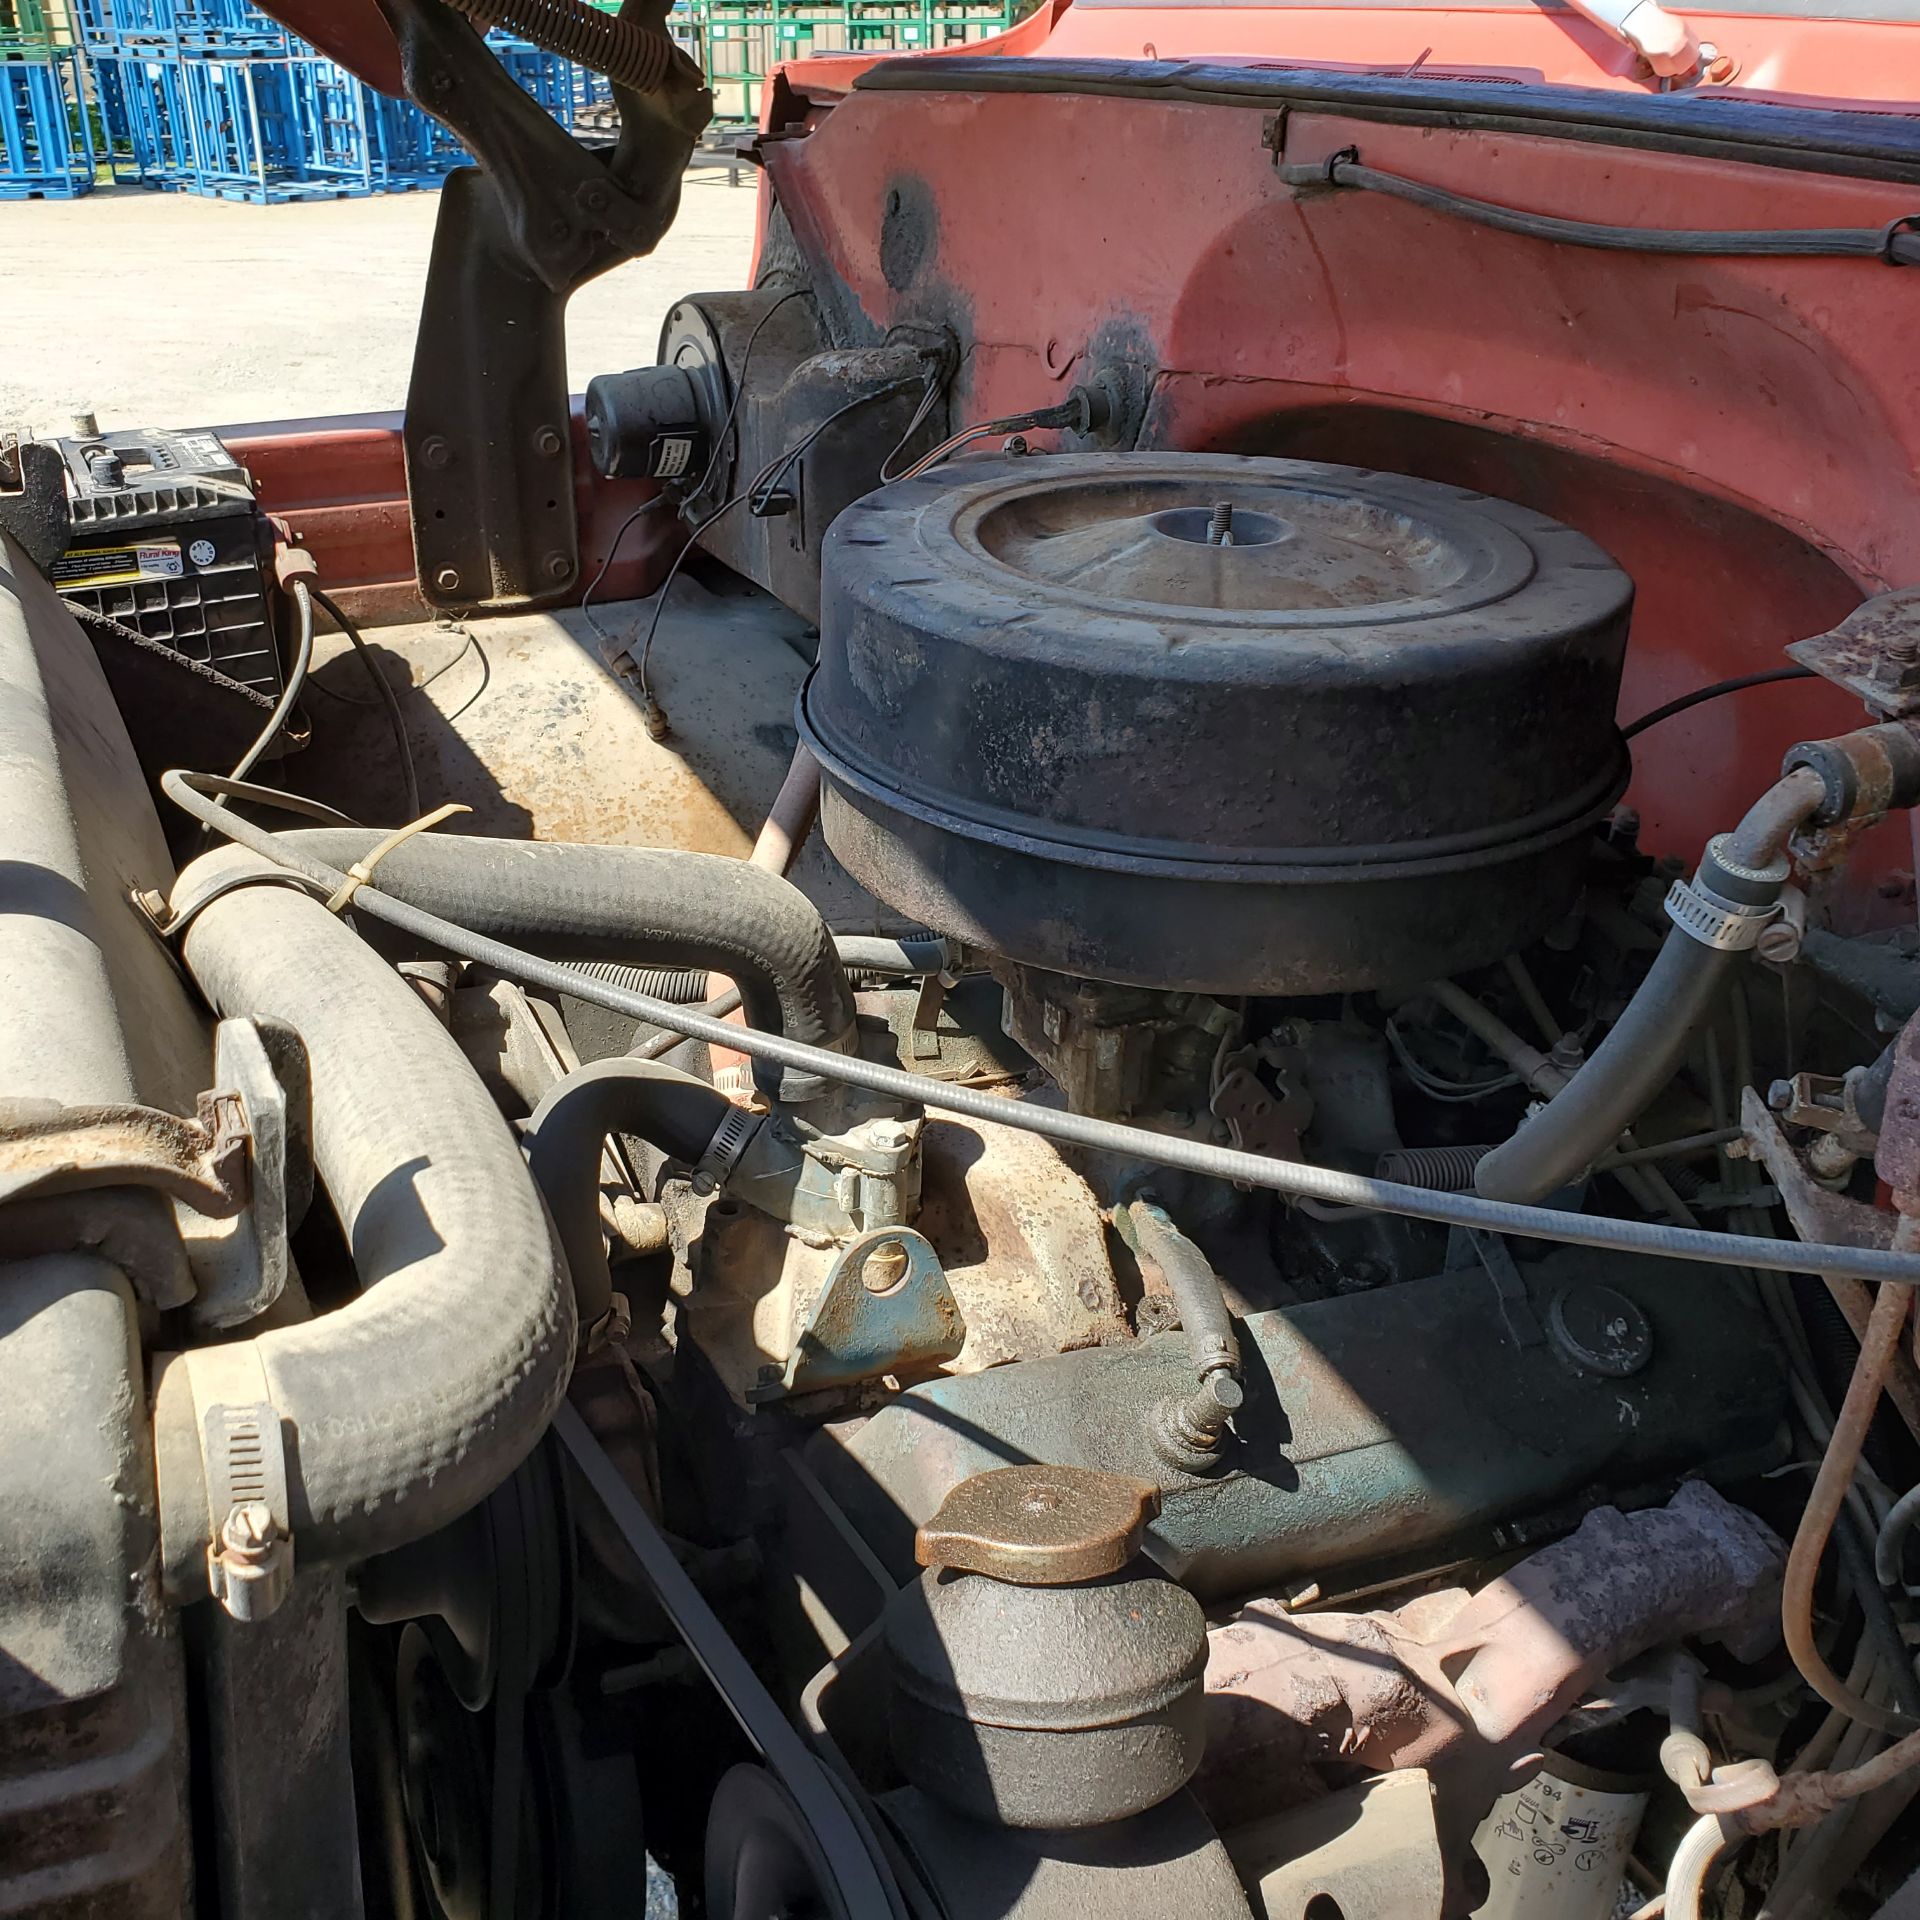 1977 Chevrolet C60 Cab and Chassis, Single Axle w/ Dual Tires and Tag Axle, 5 Speed Transmission - Image 13 of 19